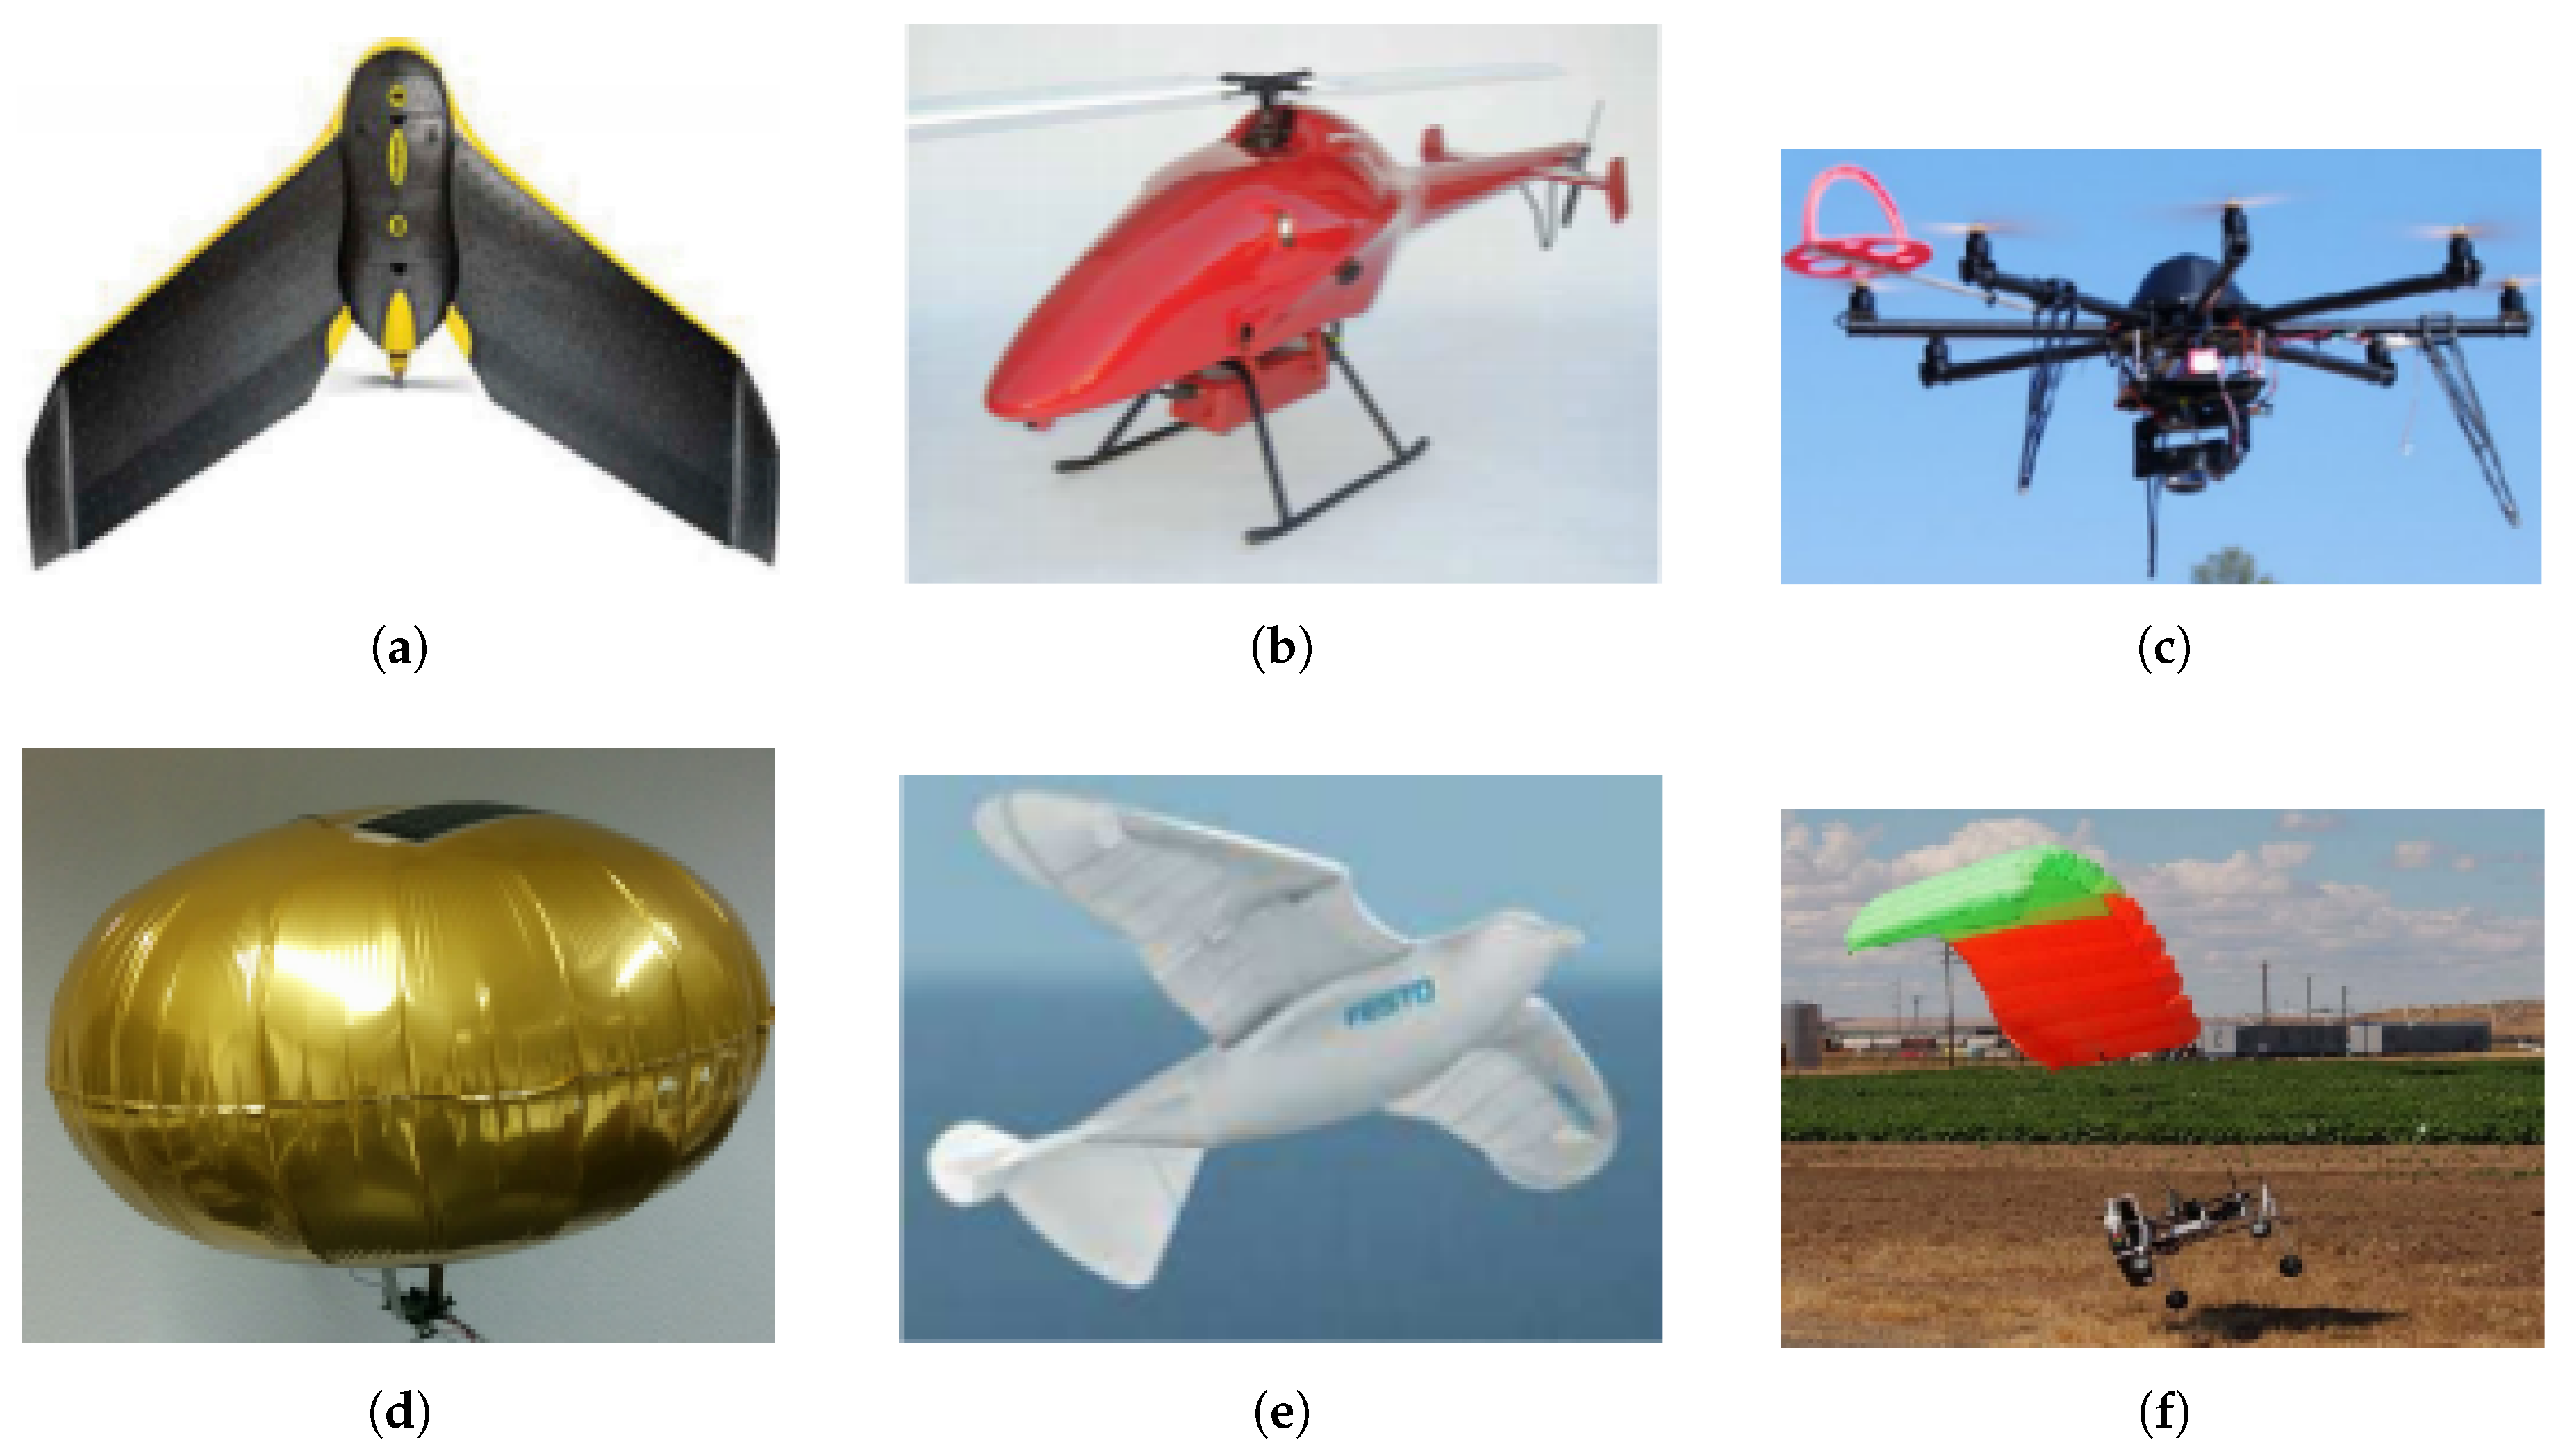 Drone types and designs are based on structures.